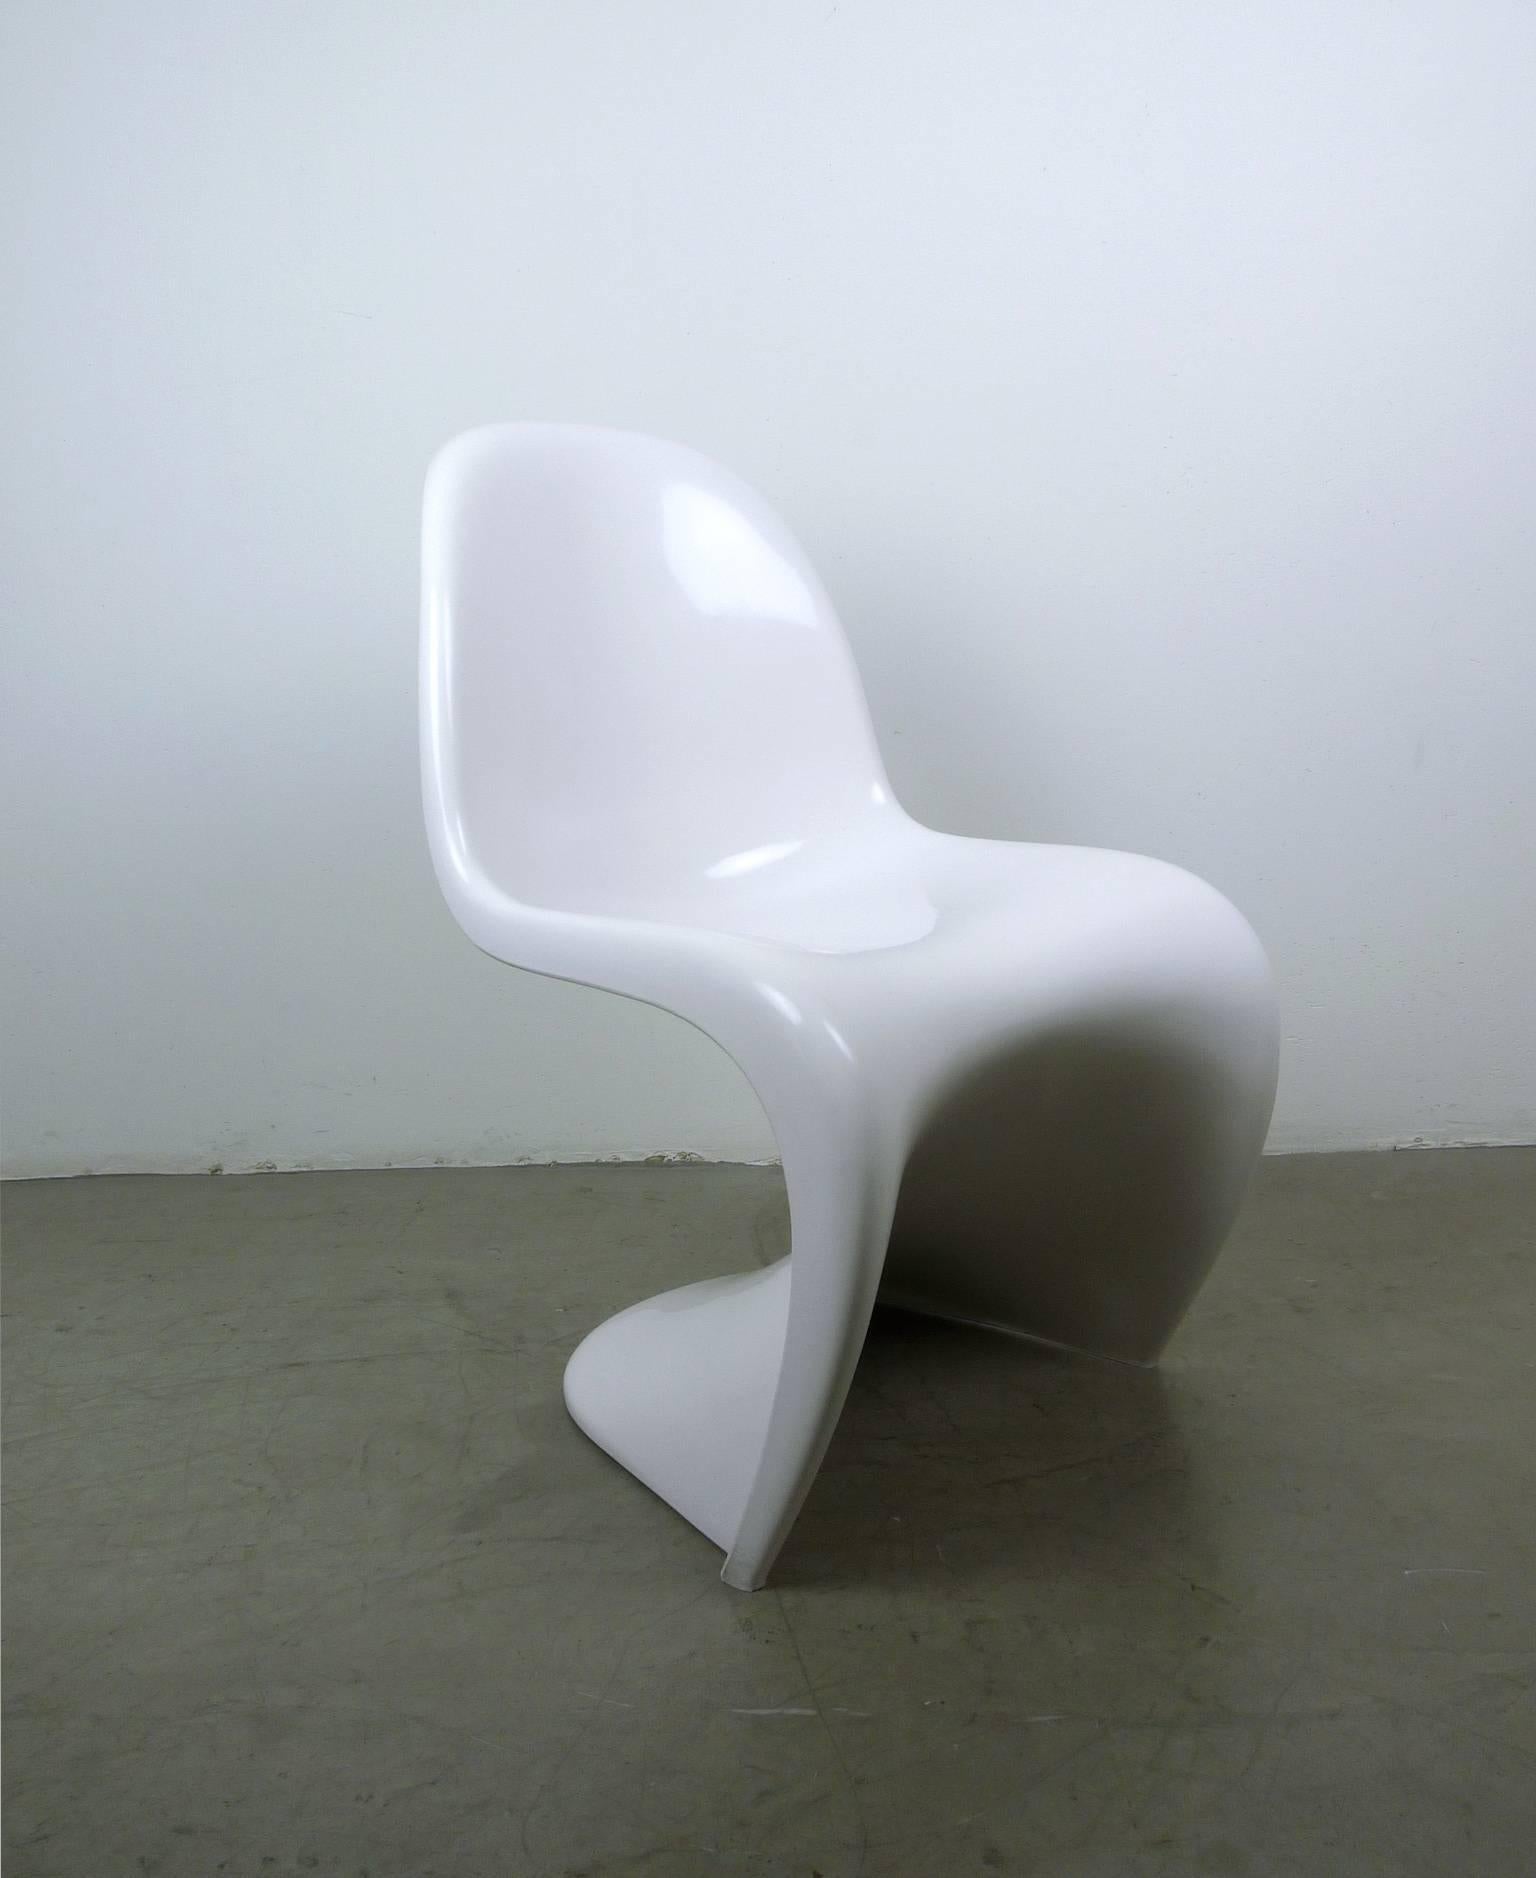 Pair of White Panton Chairs by Verner Panton for Fehlbau from 1971 and 1972 For Sale 2